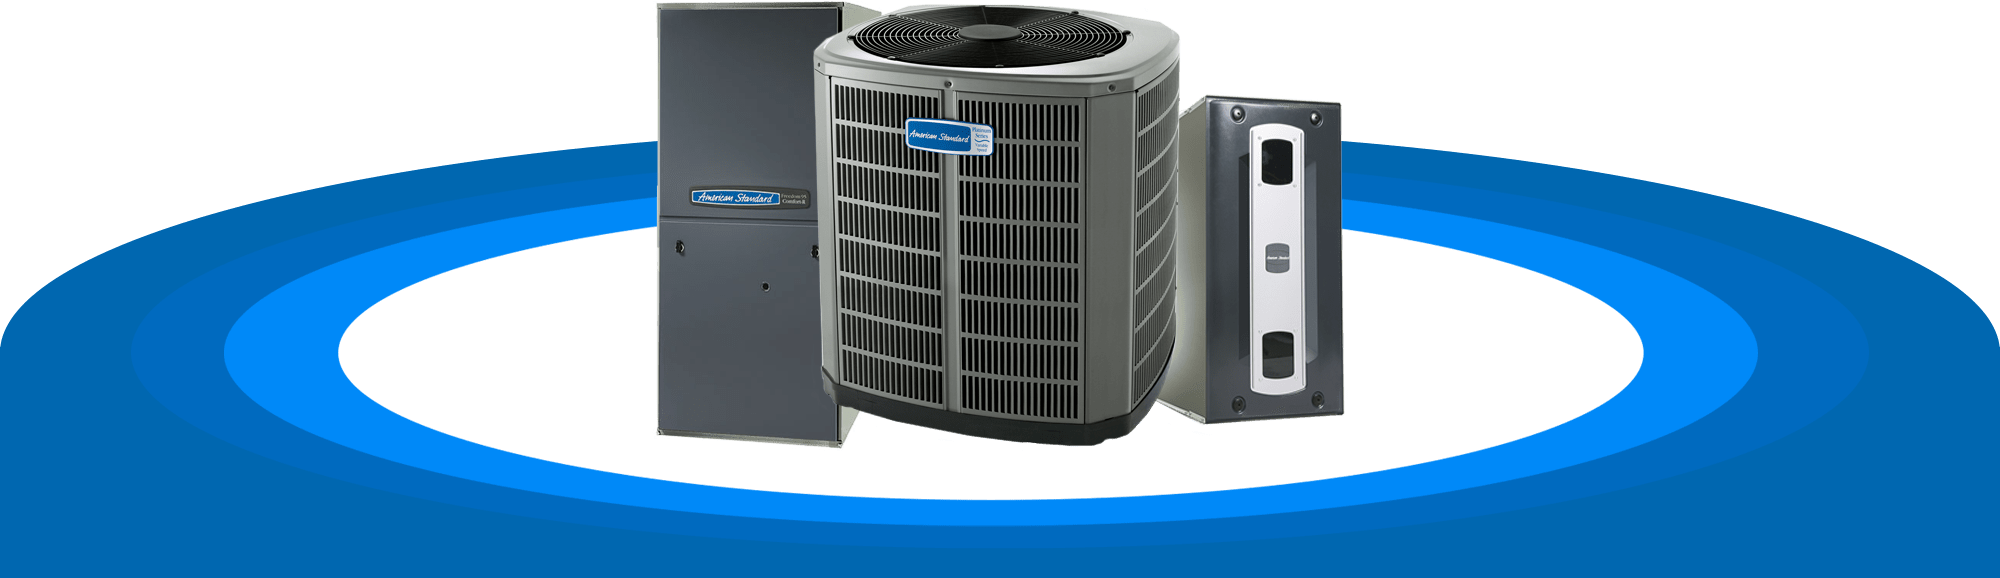 American Standard AC and Heat Pump products in Minooka IL are our specialty.